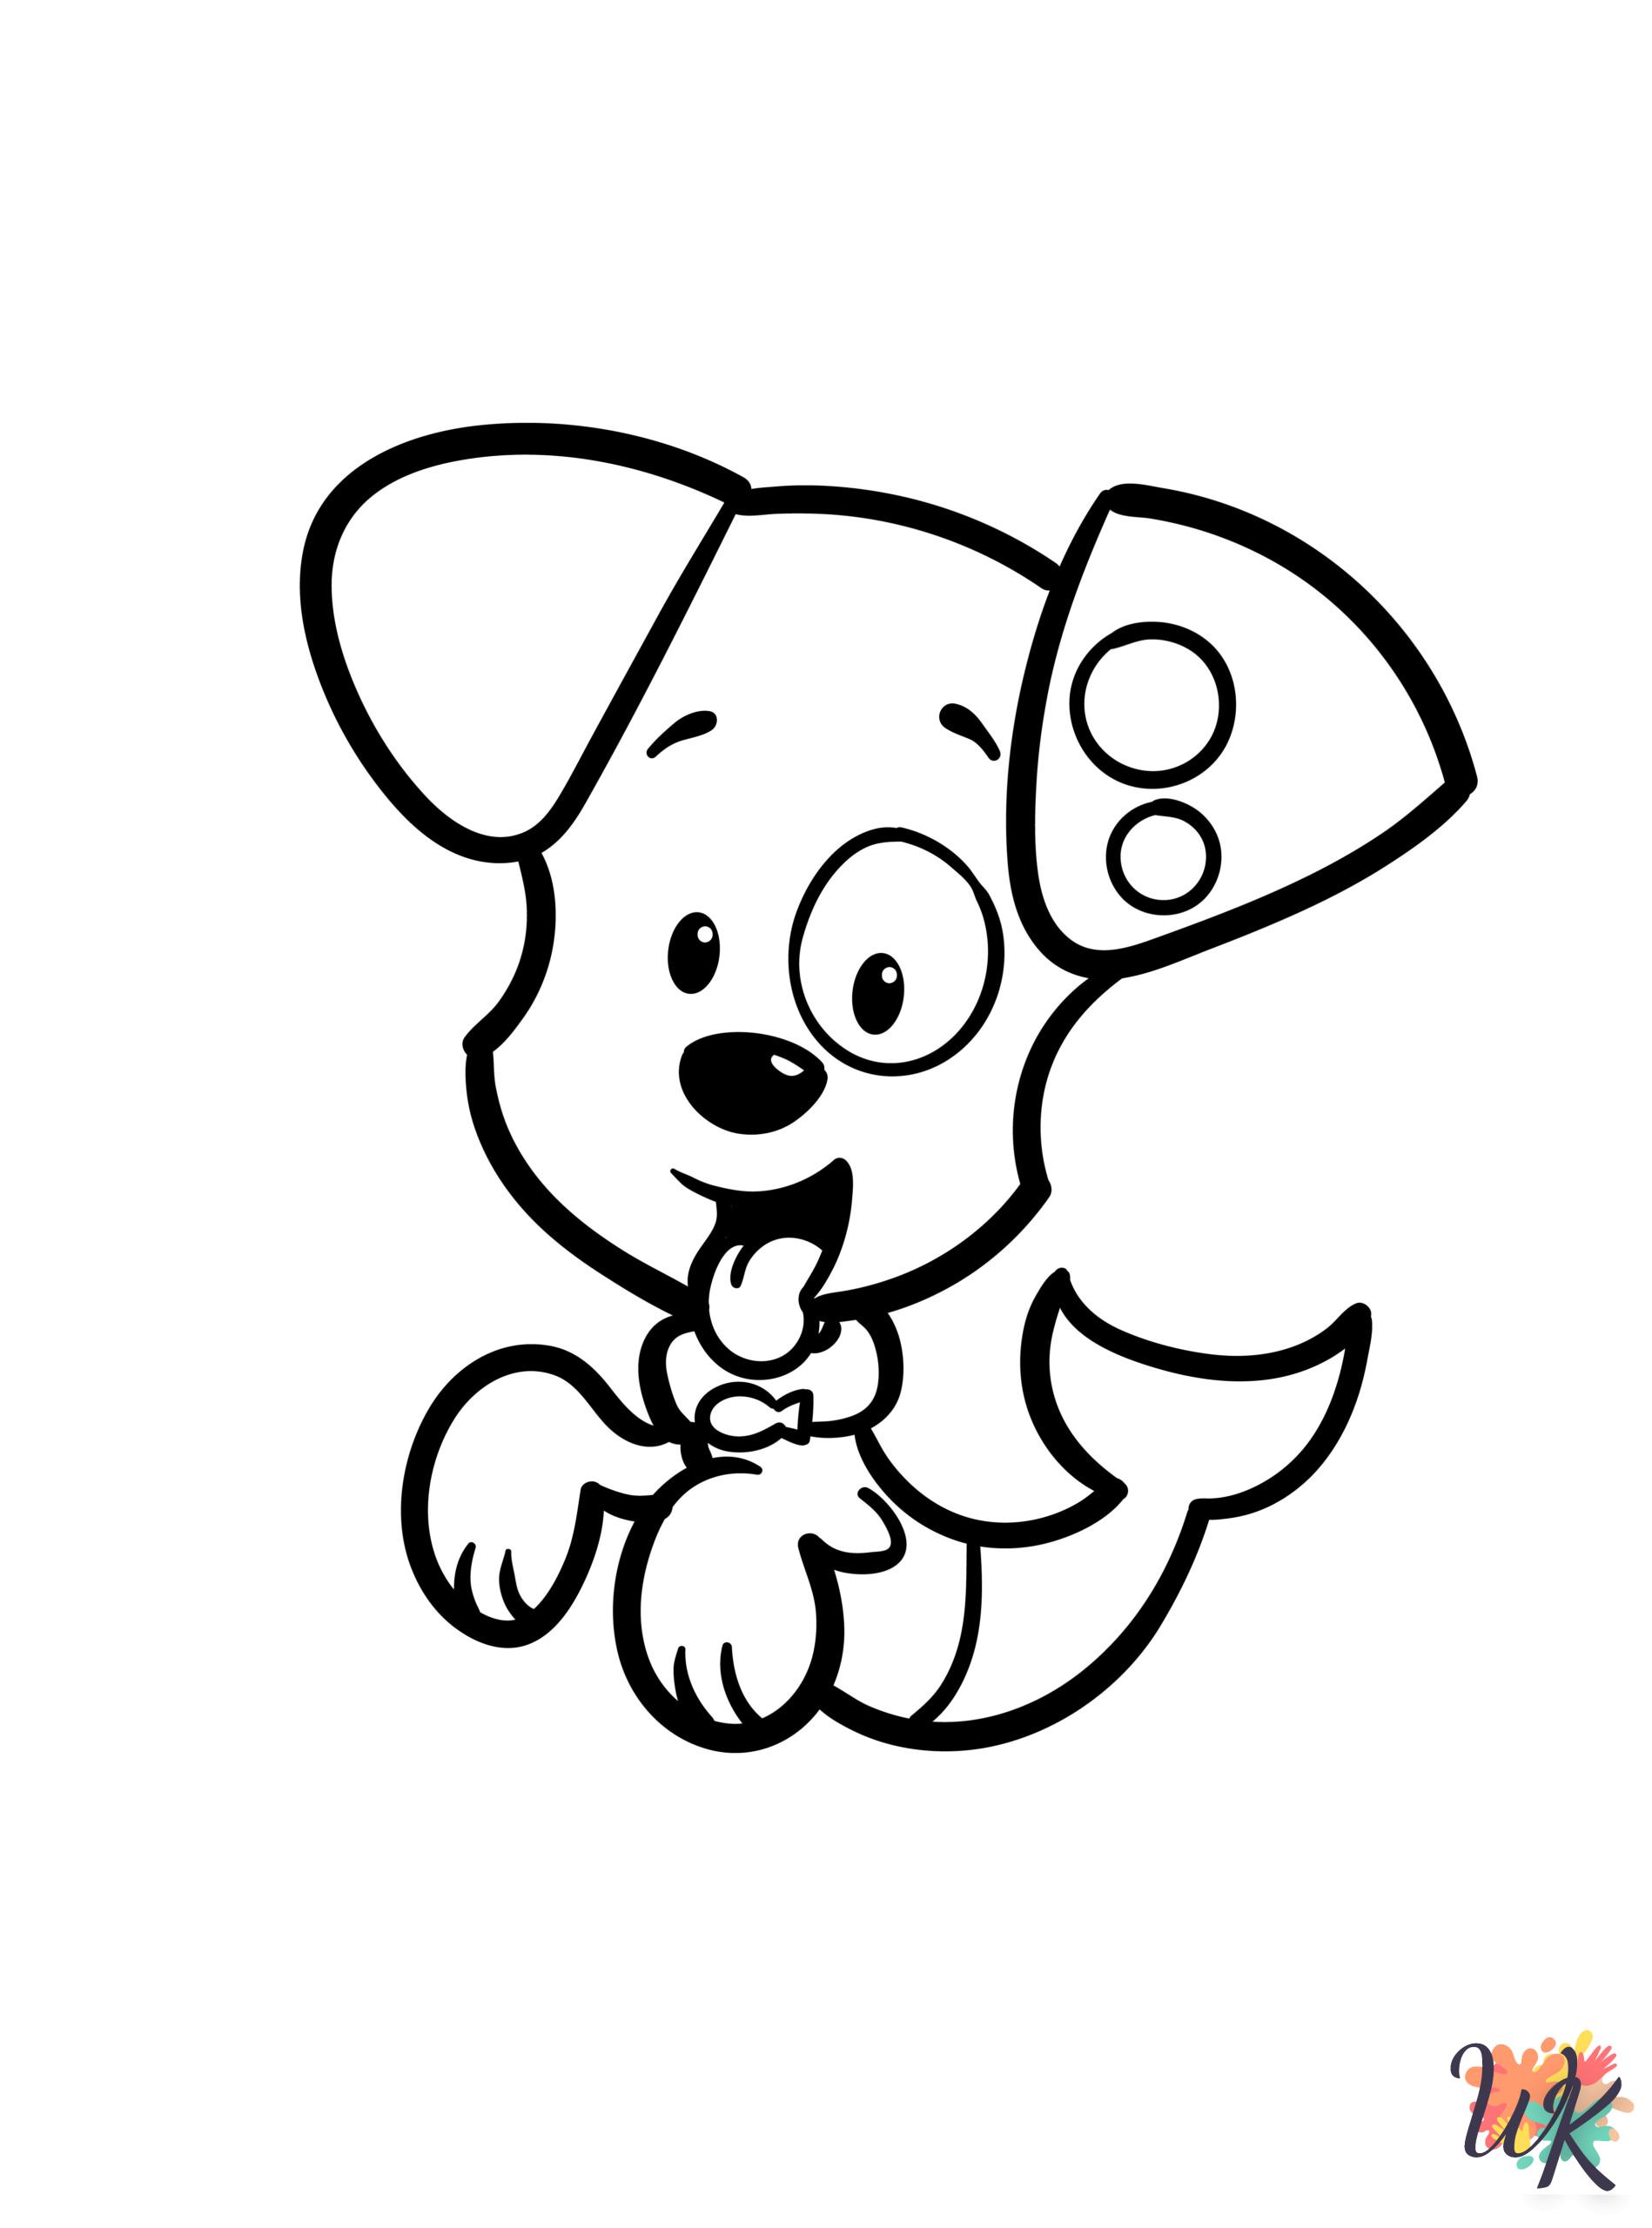 detailed Bubble Guppies coloring pages for adults